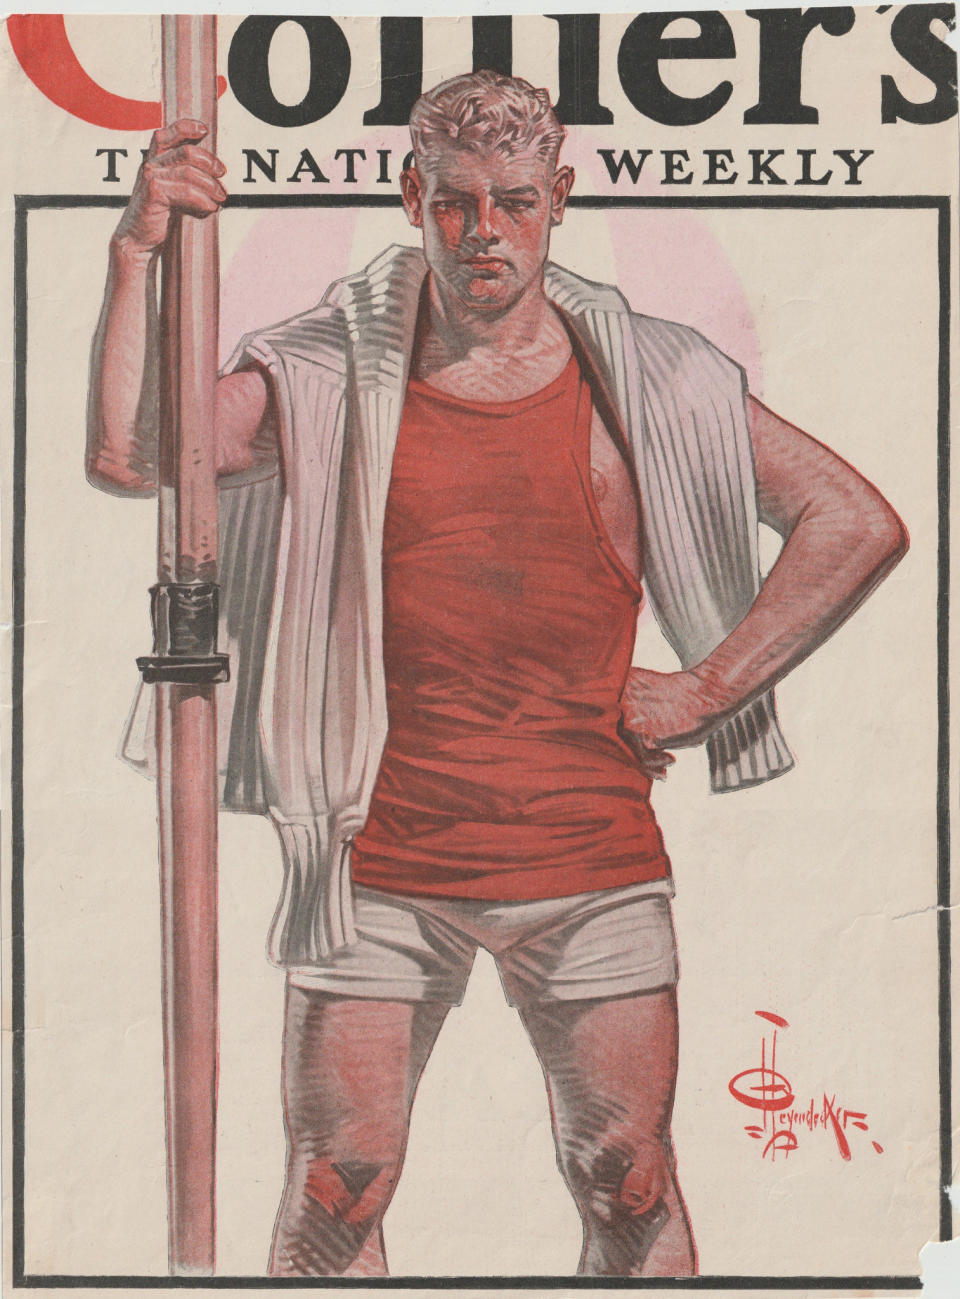 The June 24, 1916 cover of Collier’s.